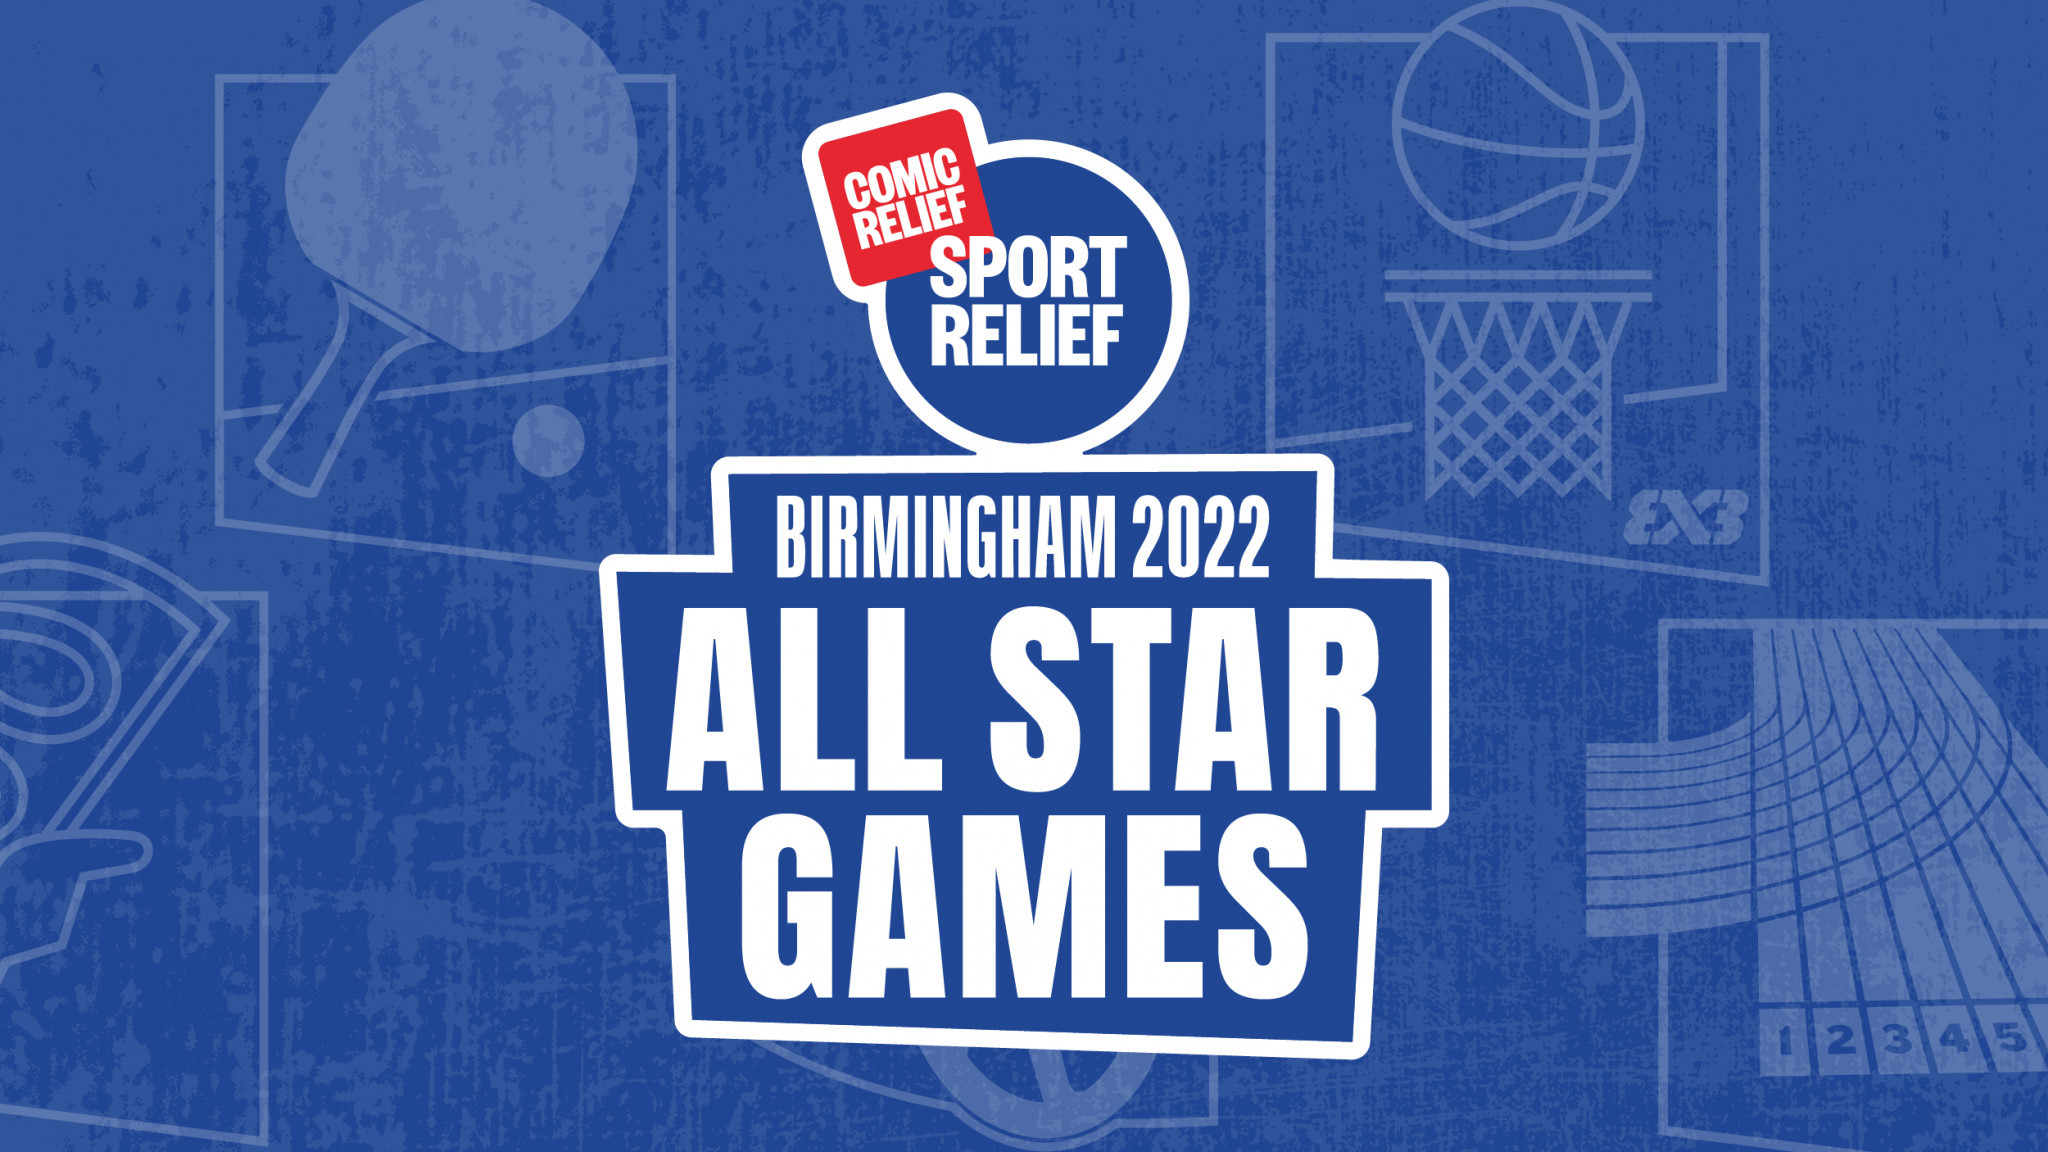 Simmonds and Holmes to be Sport Relief All Star Games: Birmingham 2022 captains